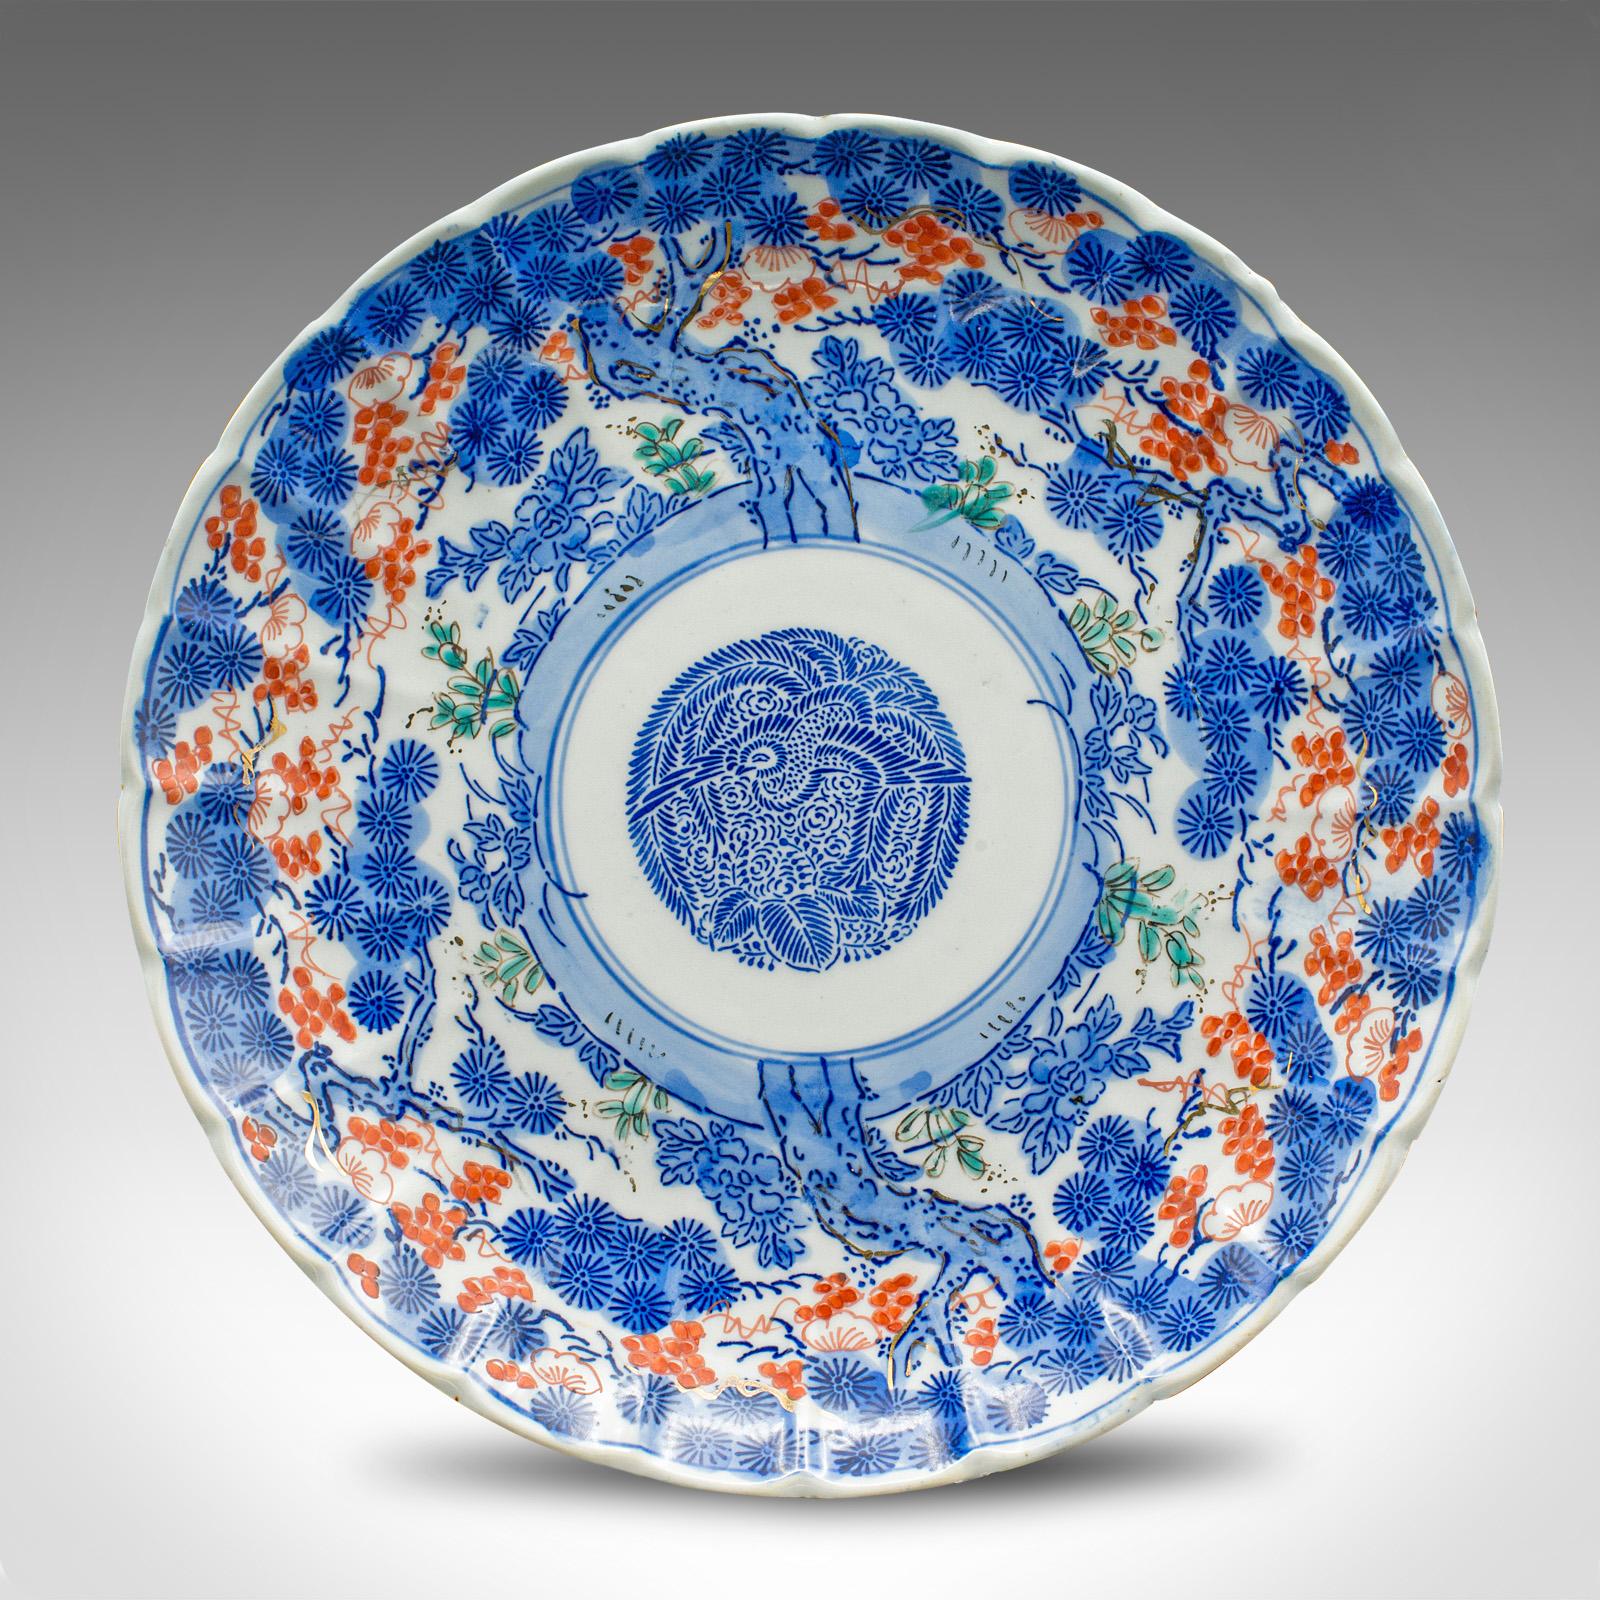 This is an antique decorative plate. A Japanese, ceramic serving dish with blue Imari taste, dating to the late Victorian period, circa 1900.

Dashingly decorative serving plate with appealing patterns
Displays a desirable aged patina and in good